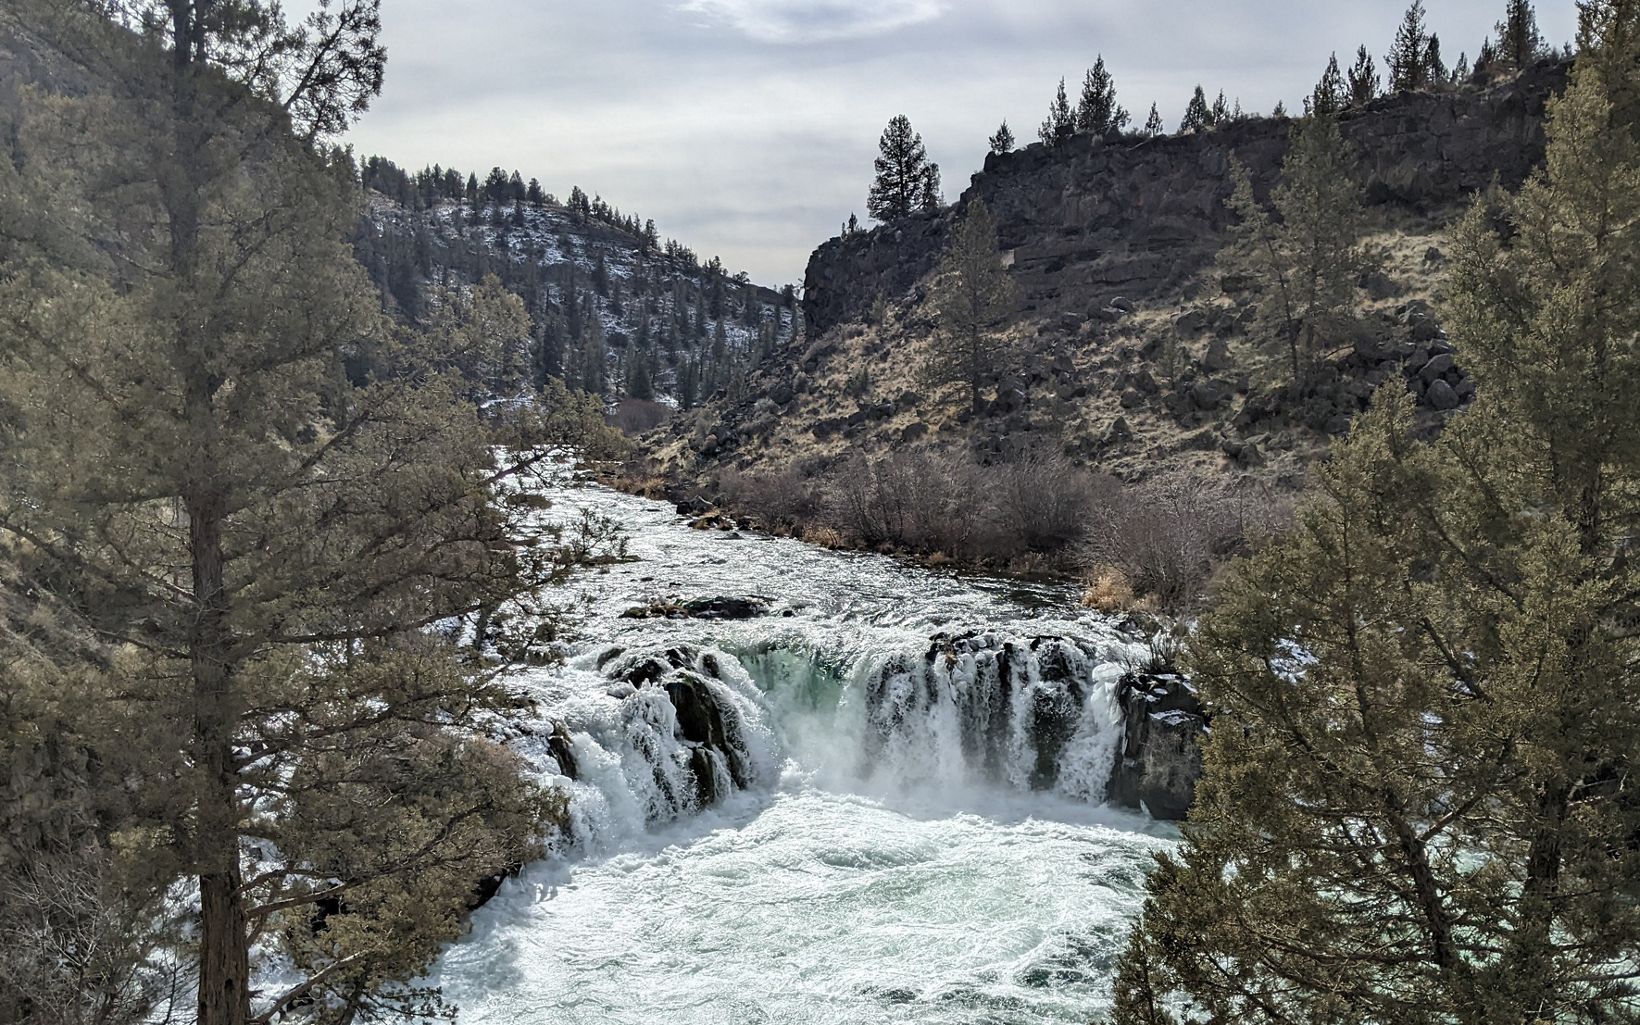 The Deschutes The Deschutes River was once called the "Peculiar River" due to its consistent and drought-resilient flows. Now we know that's because of groundwater. © Zach Freed